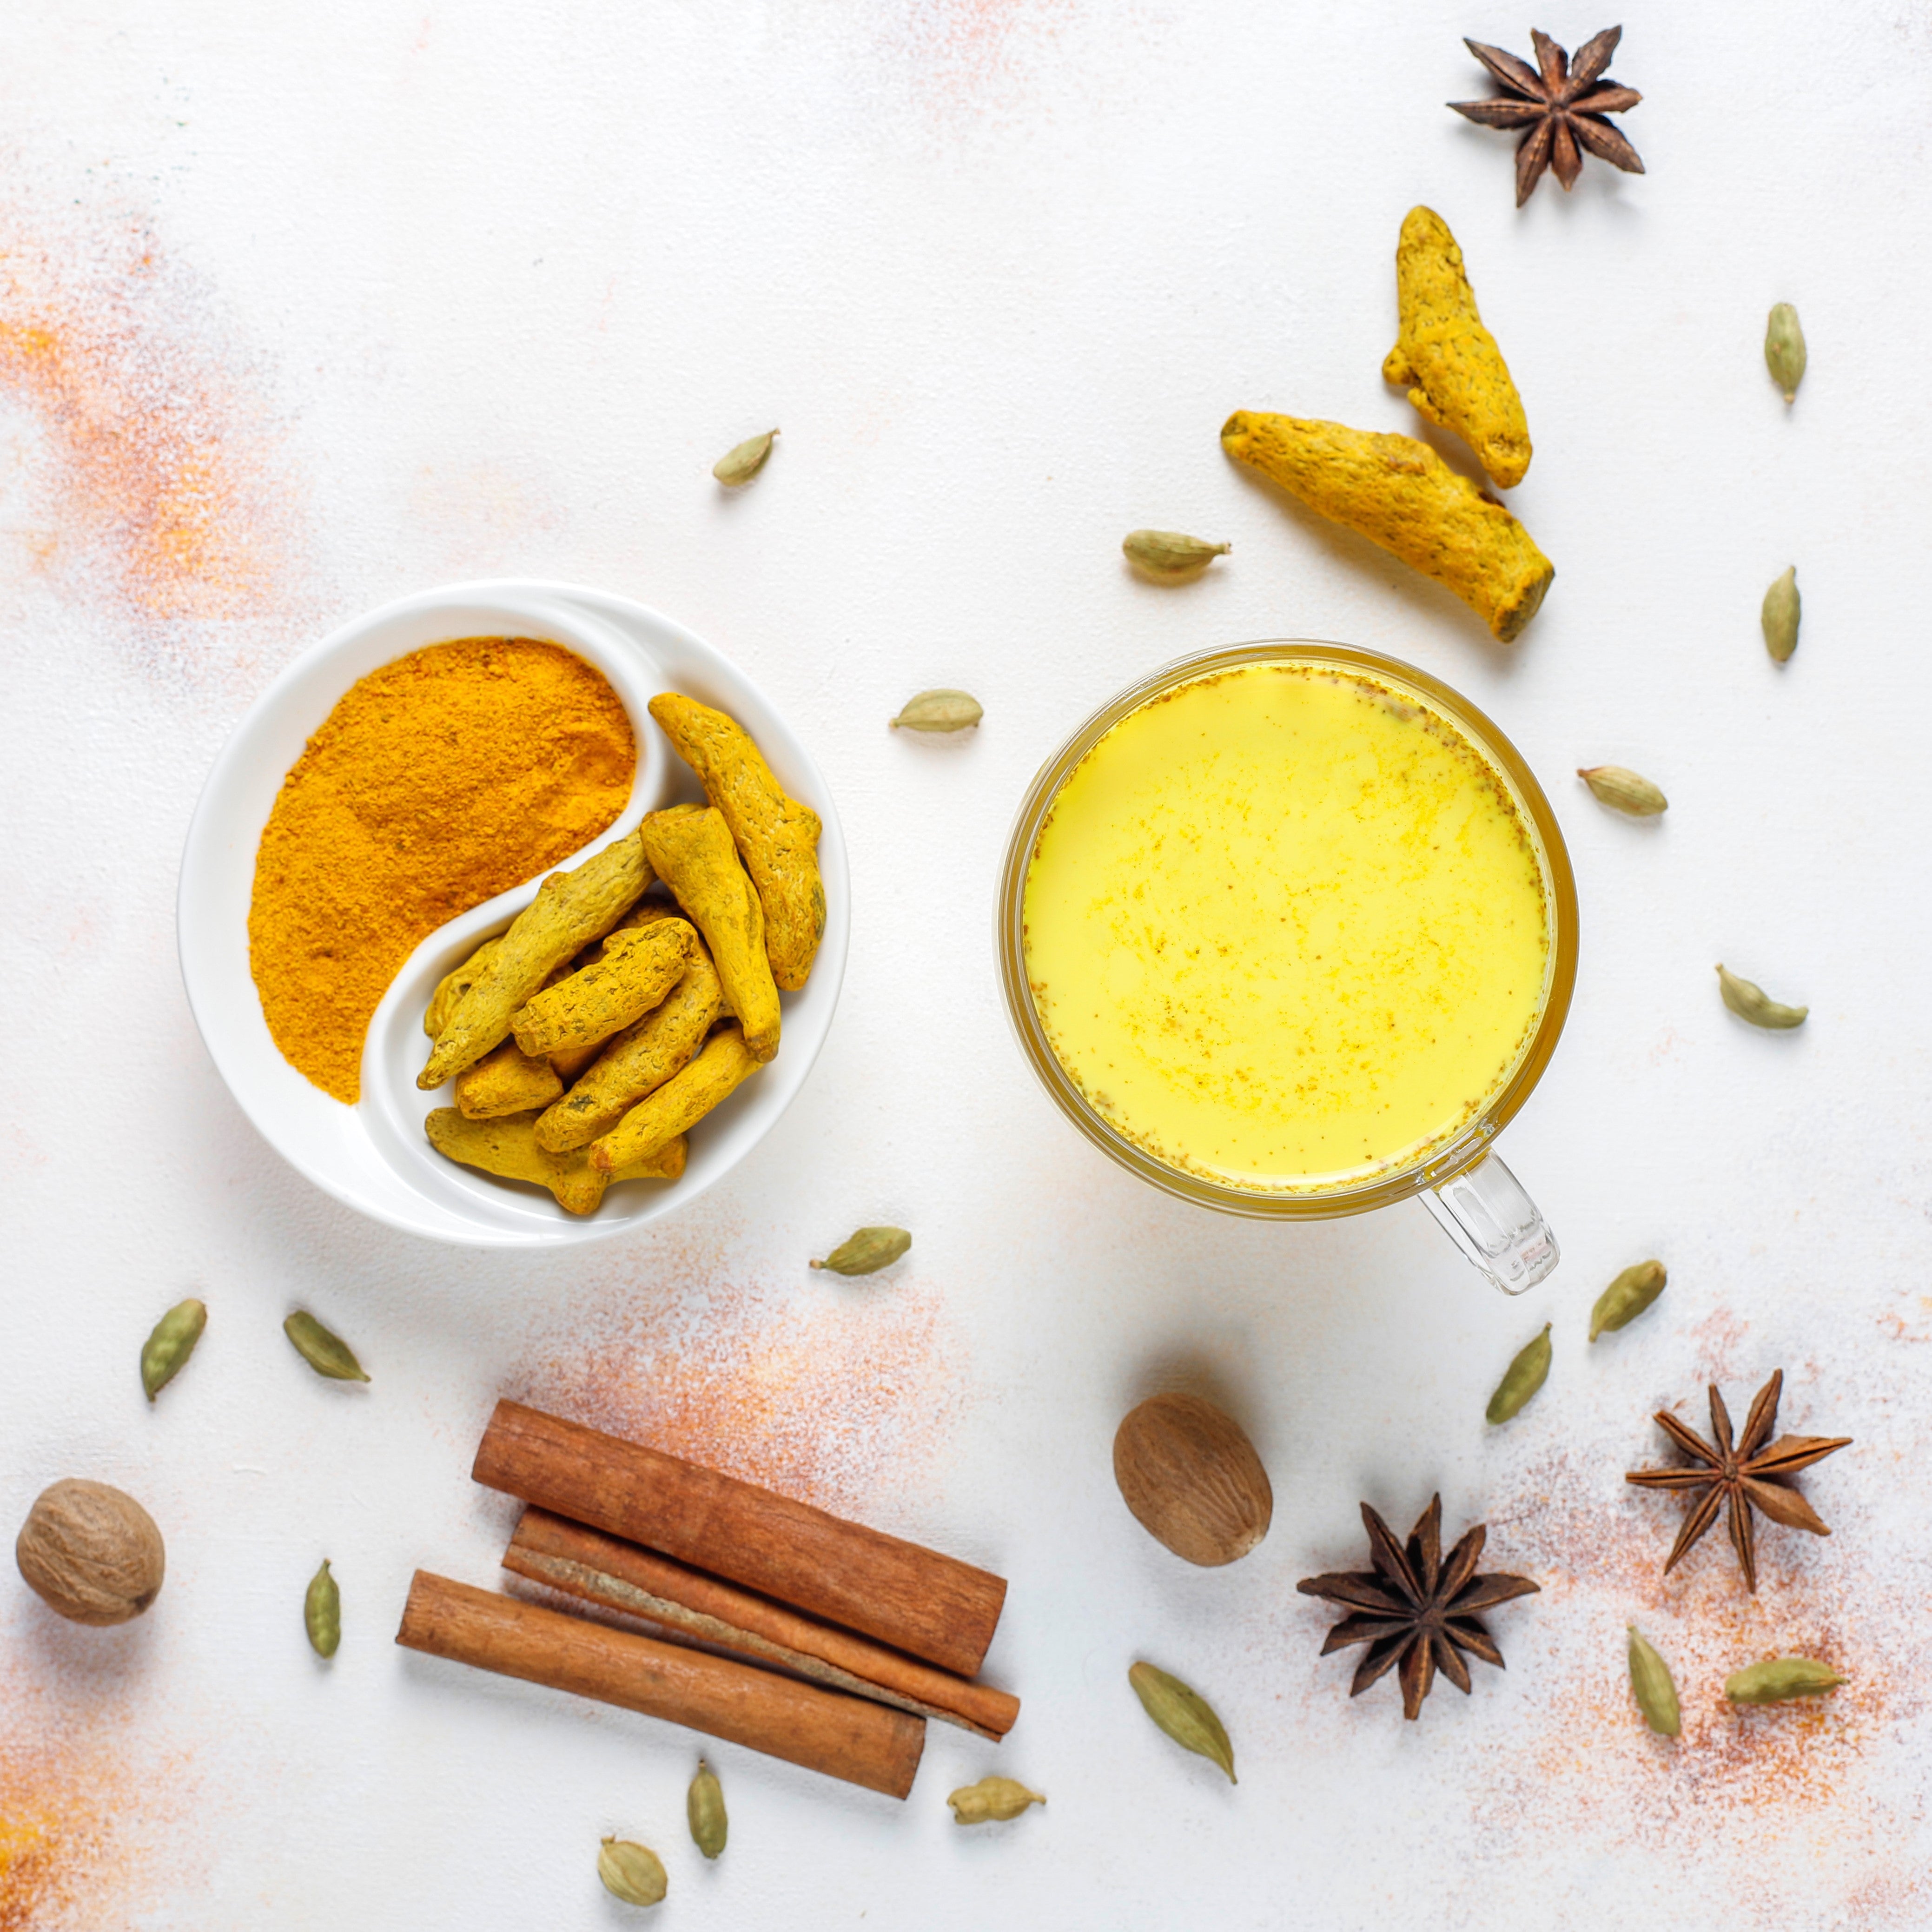 Why is Turmeric a Super Spice?